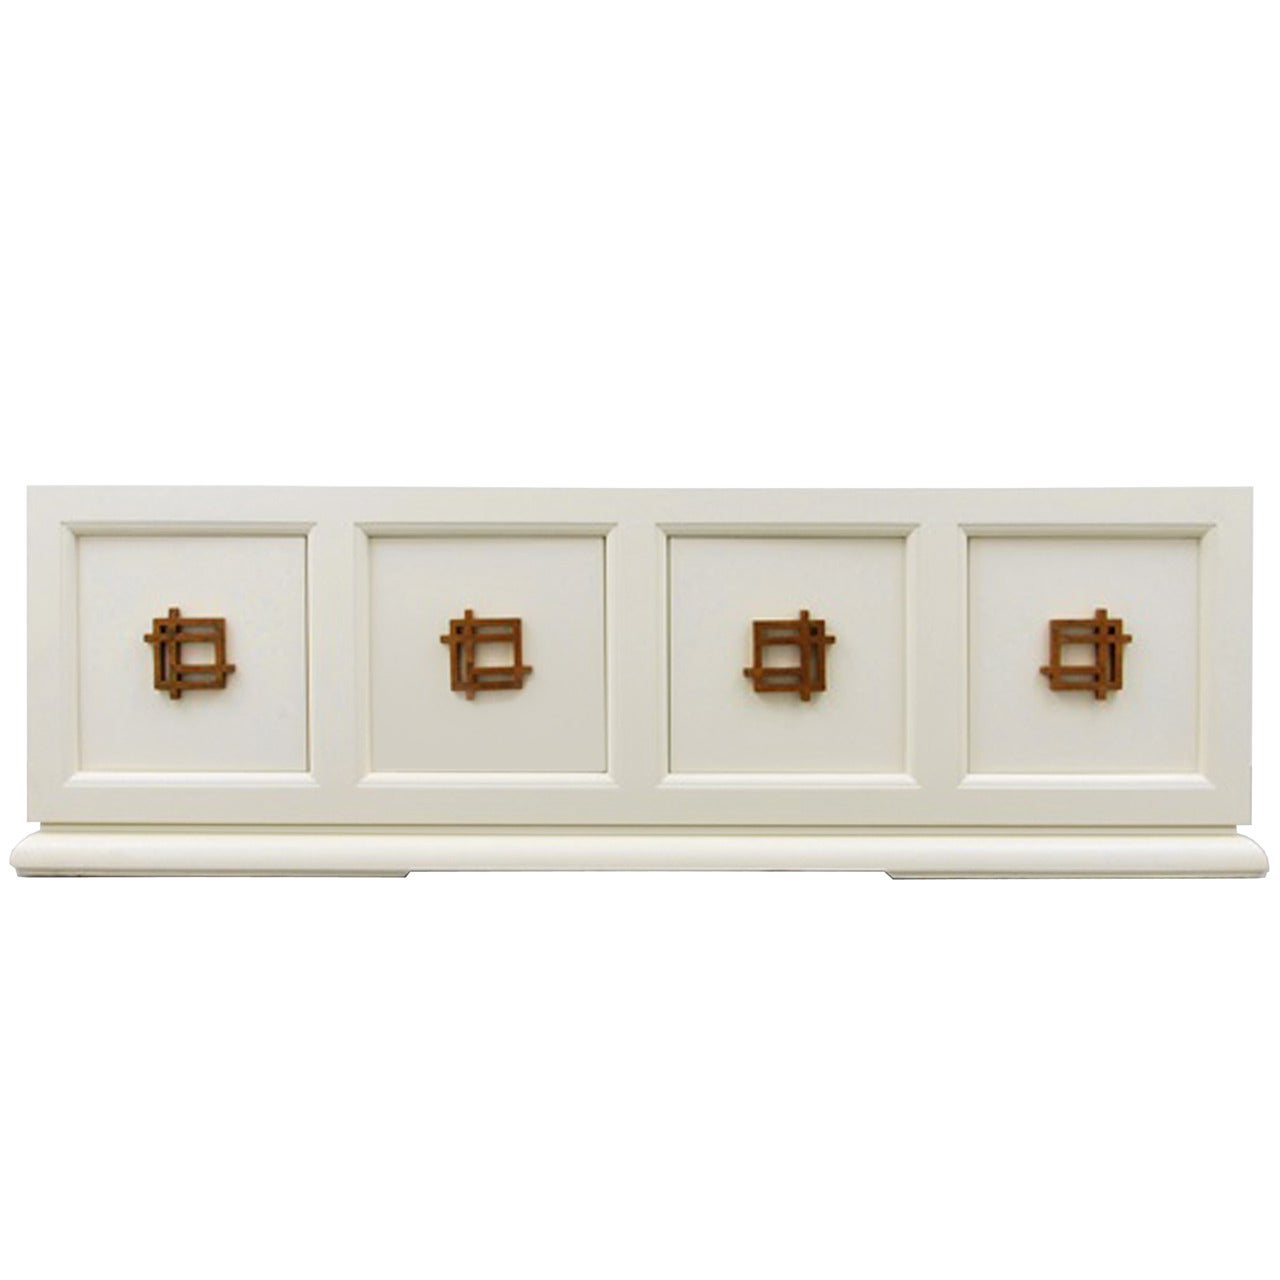 James Mont Four-Door, Lacquered Cabinet with Large Brass Pulls